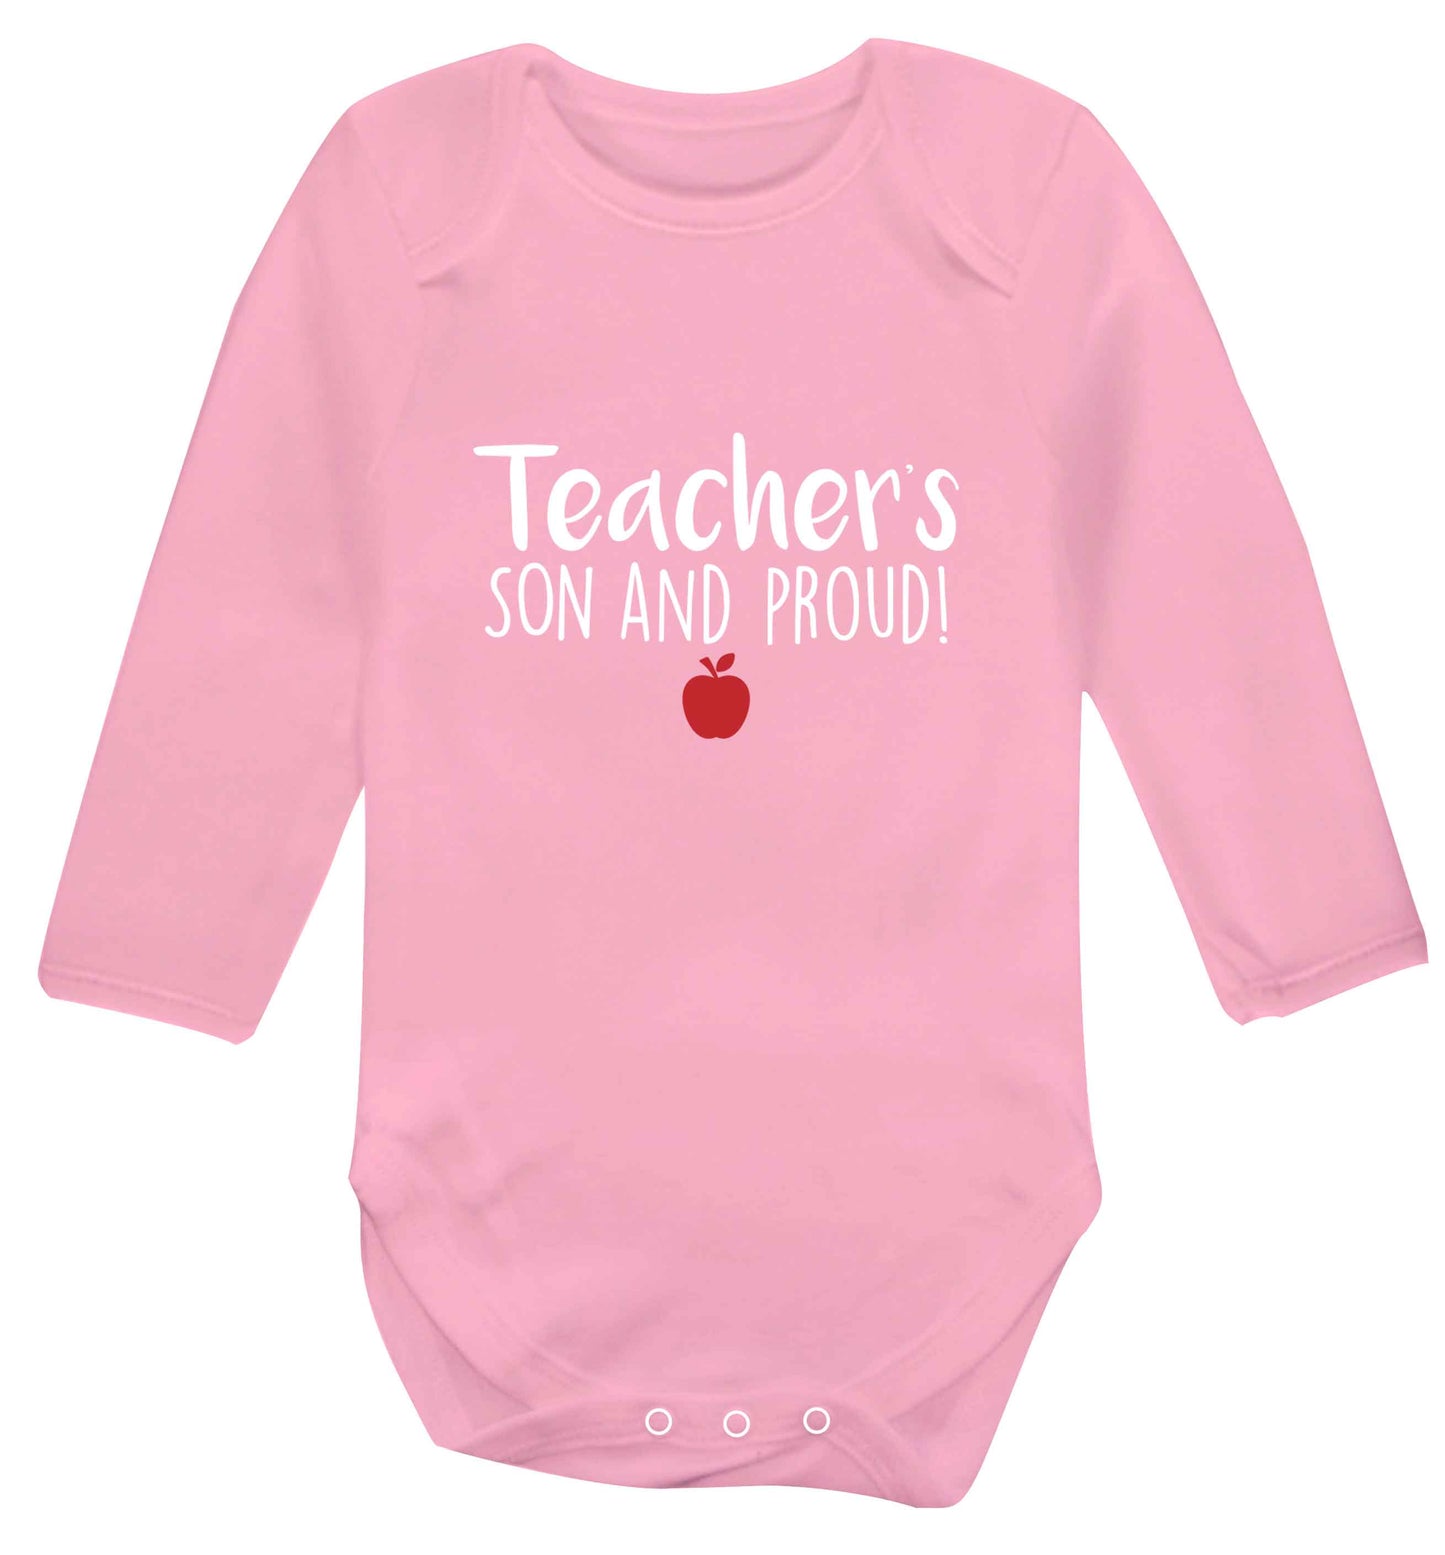 Teachers son and proud baby vest long sleeved pale pink 6-12 months